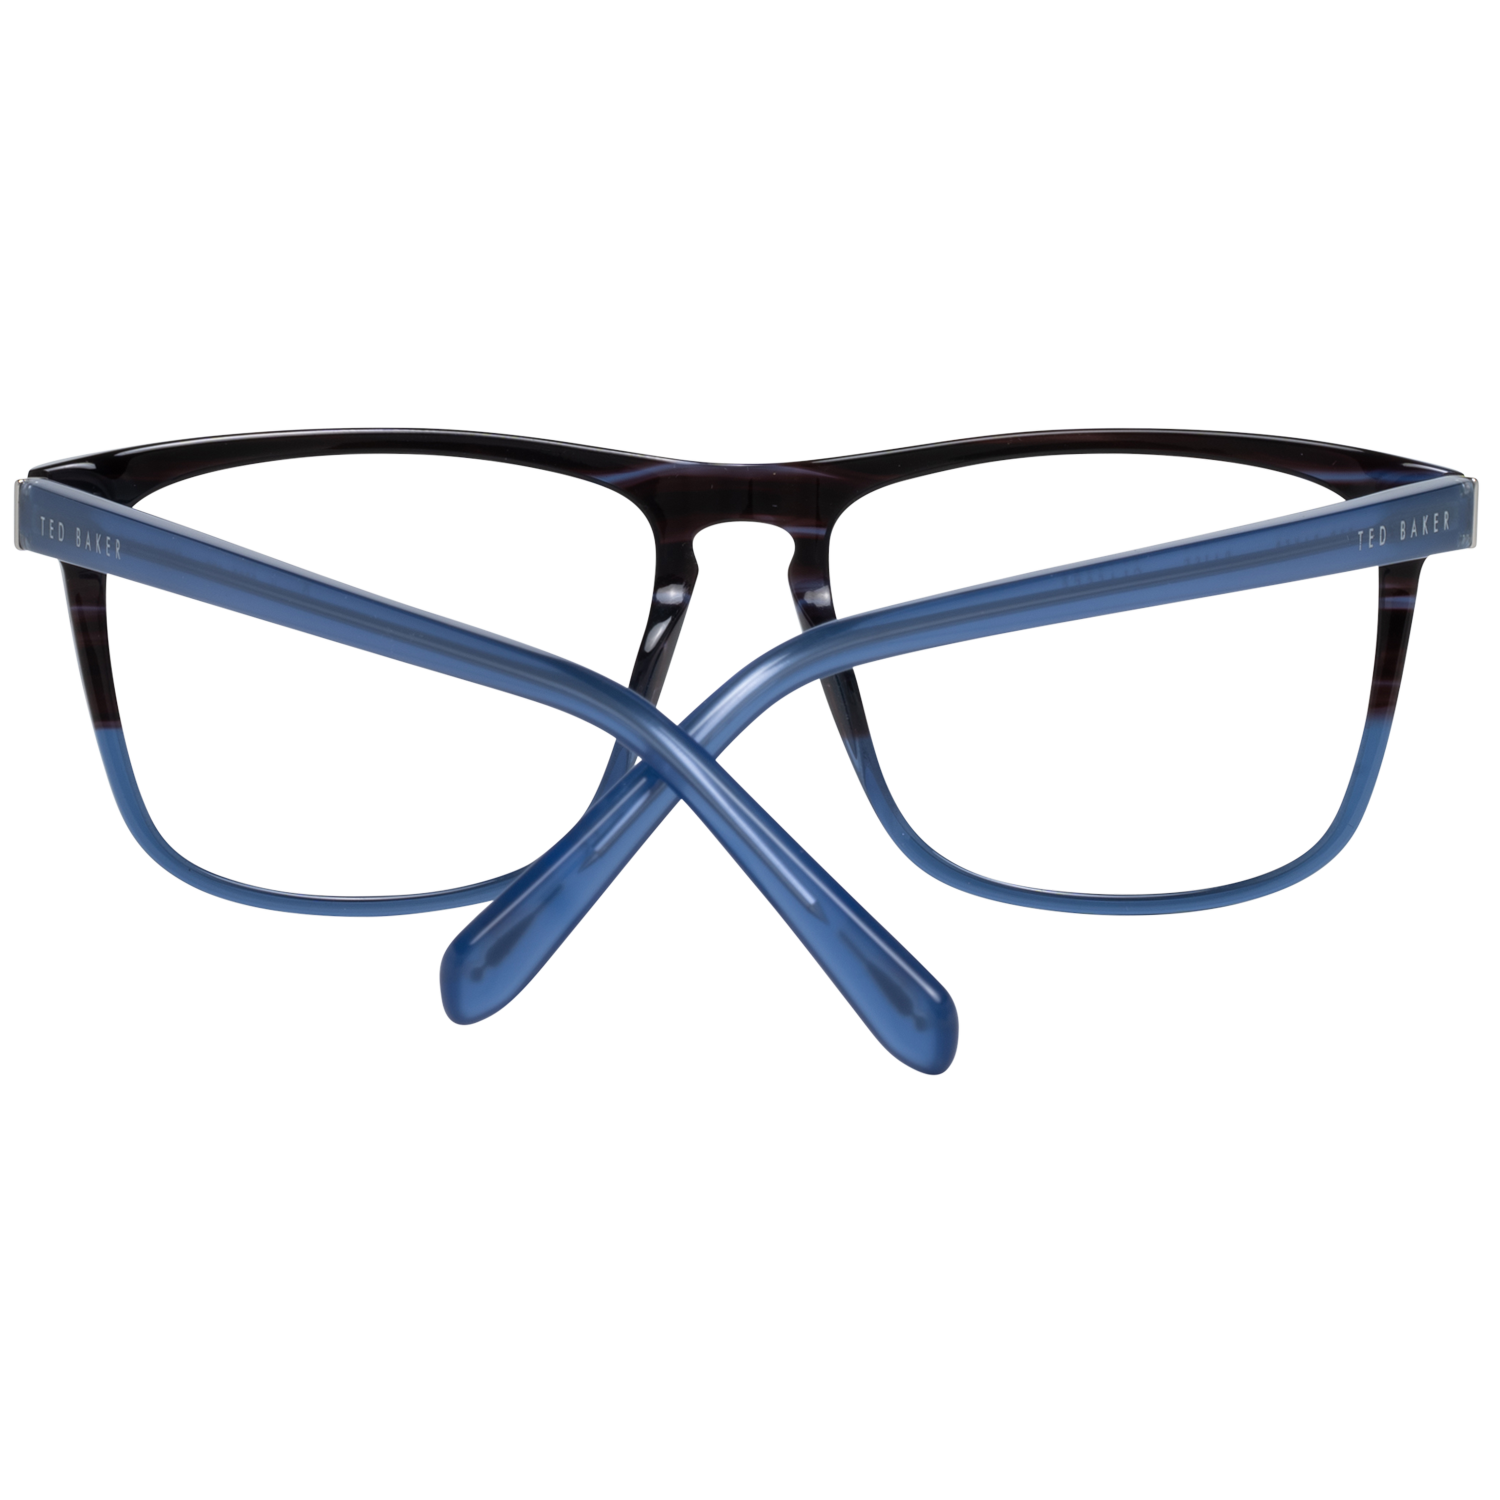 Ted Baker Rectangular Mens Blue TB8229 Cornell  Glasses are a modern rectangular style crafted from lightweight acetate. The one piece nose pads provide all day comfort. Ted Baker's logo is embedded into the slender temples for authenticity.